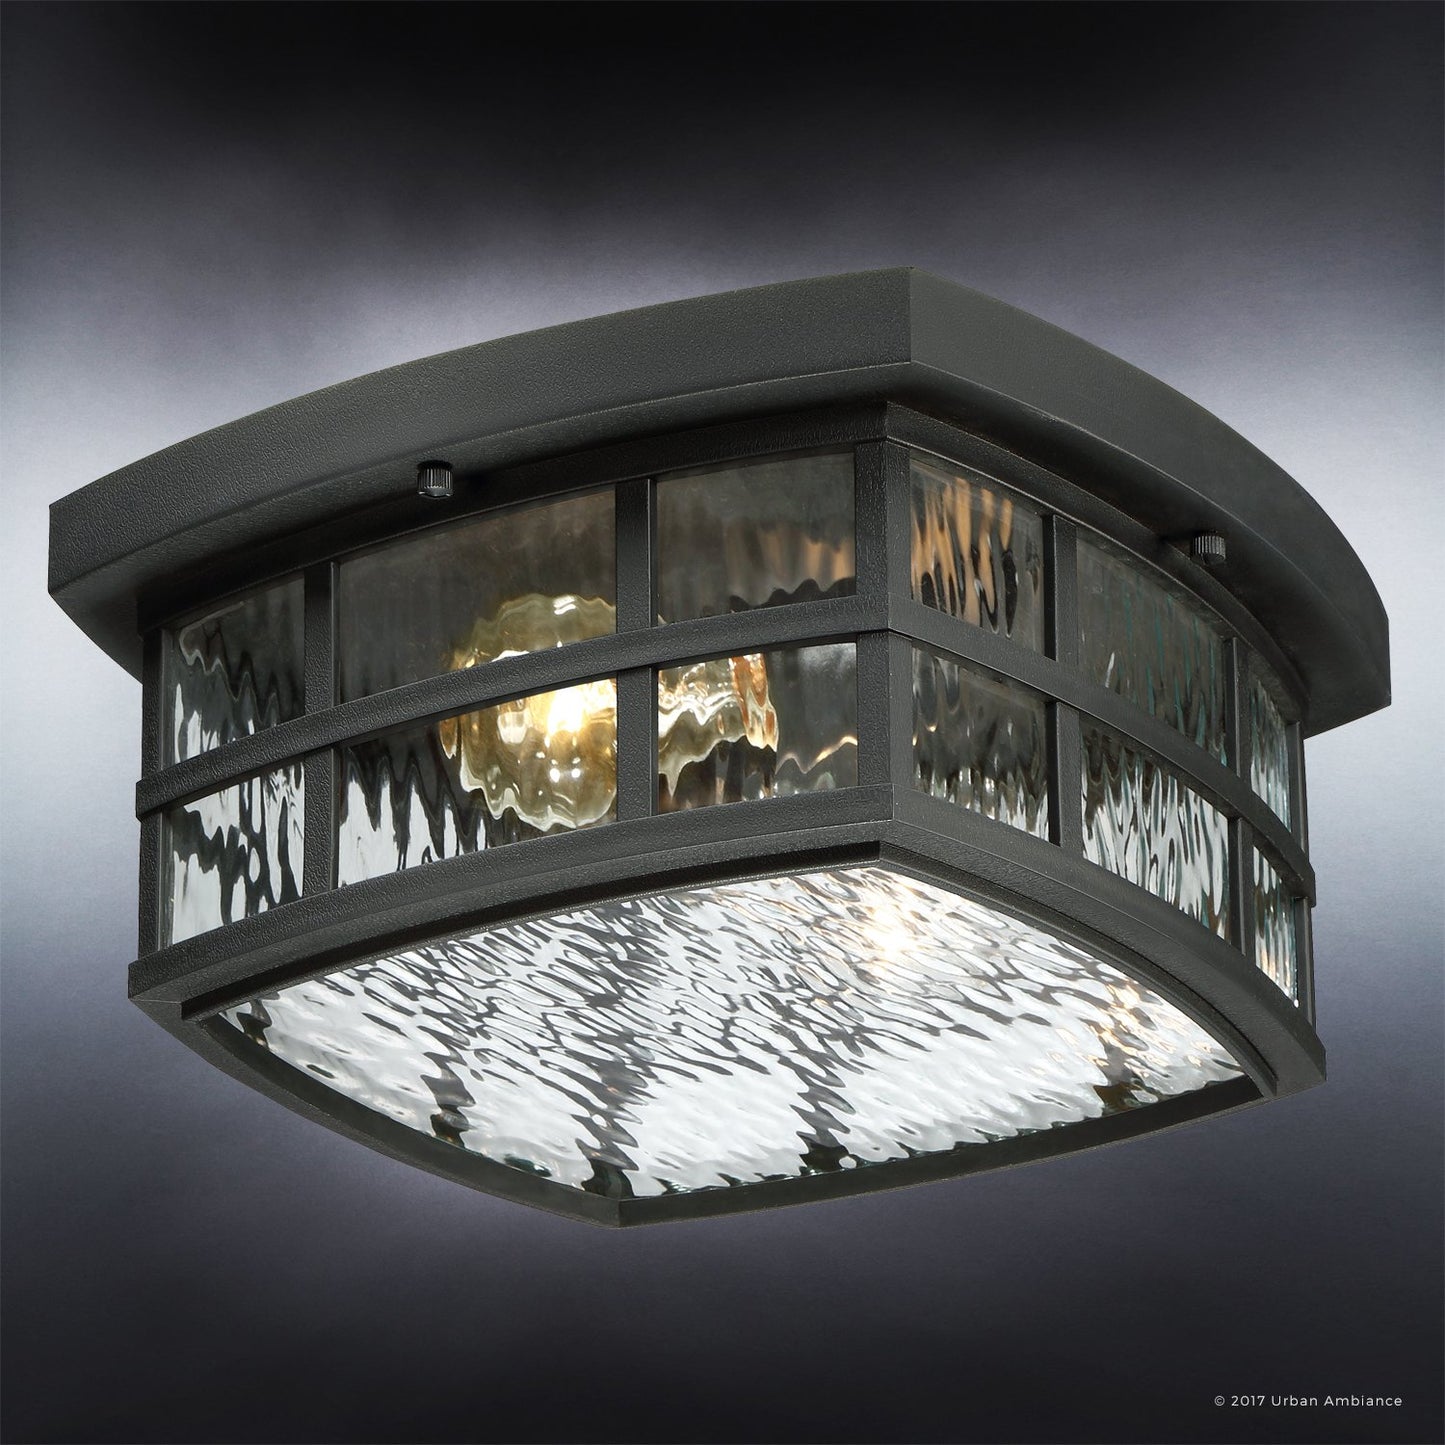 Urban Ambiance Luxury Craftsman Outdoor Ceiling Light, Small Size: 5.75" H x 12" W, with Tudor Style Elements, Highly-Detailed Design, High-End Black Silk Finish and Water Glass, UQL1248